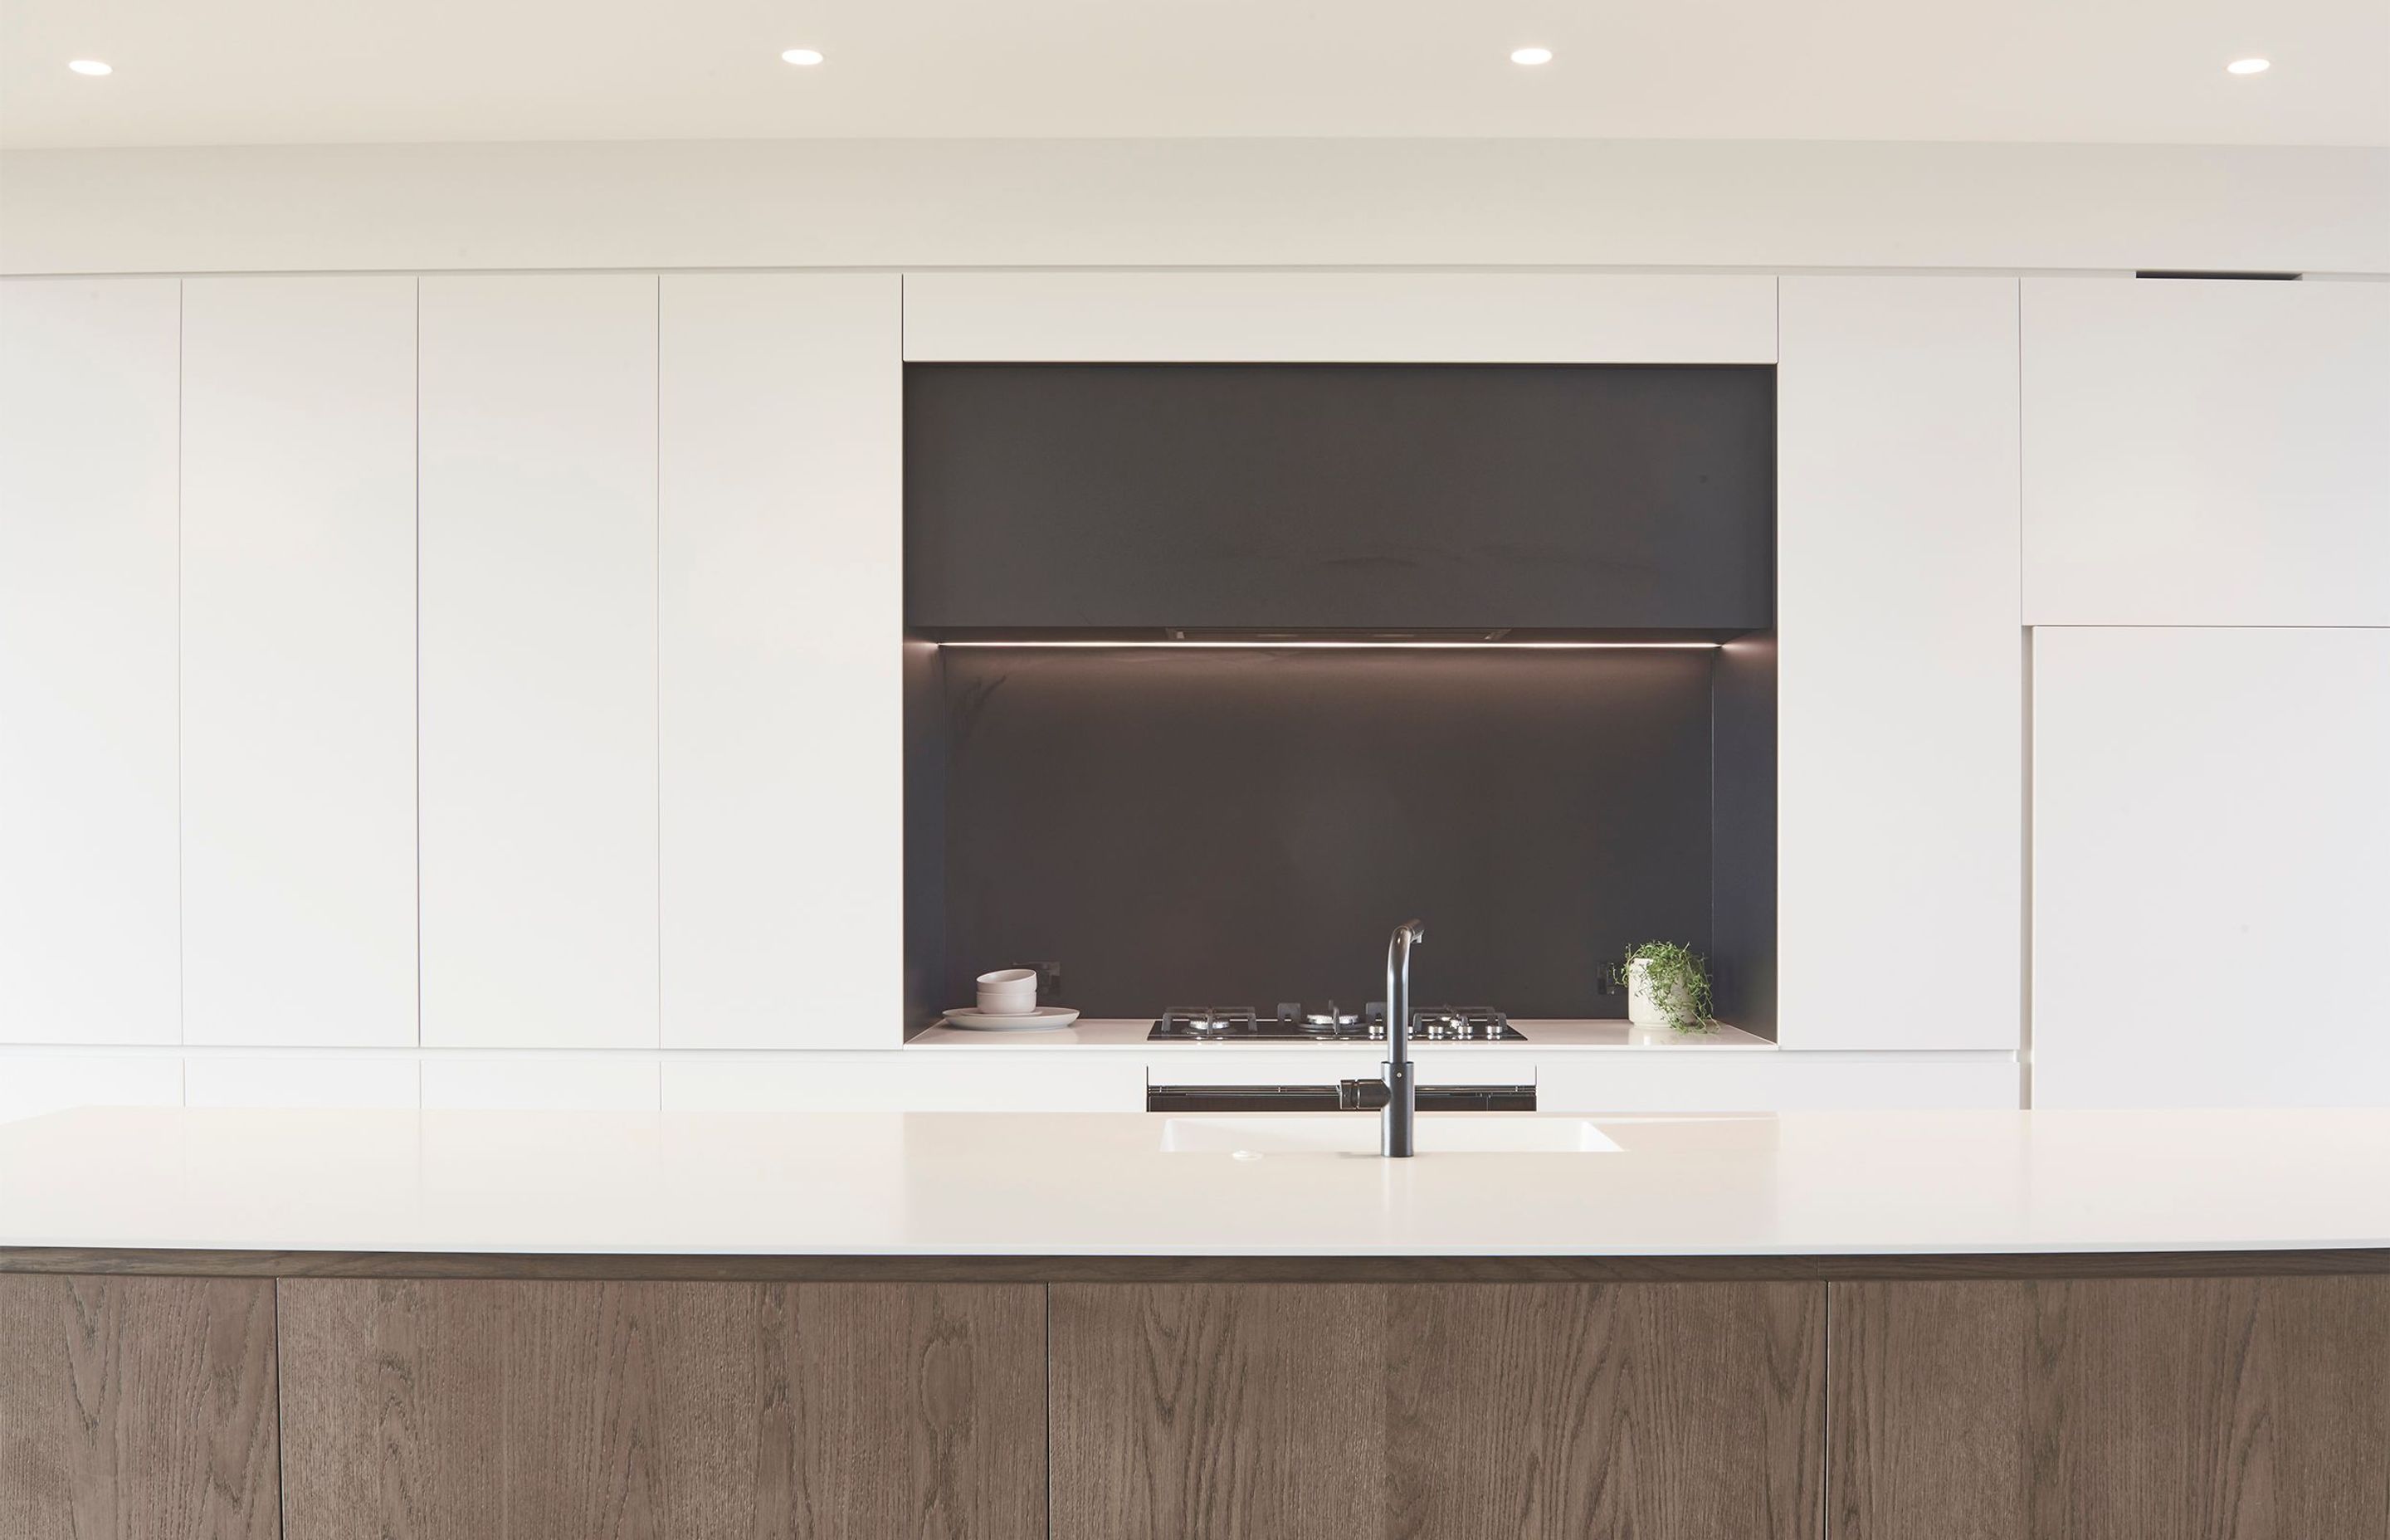 In keeping with the pared-back nature of the design, Morgan Cronin of Cronin Kitchens designed a minimal, contemporary kitchen.